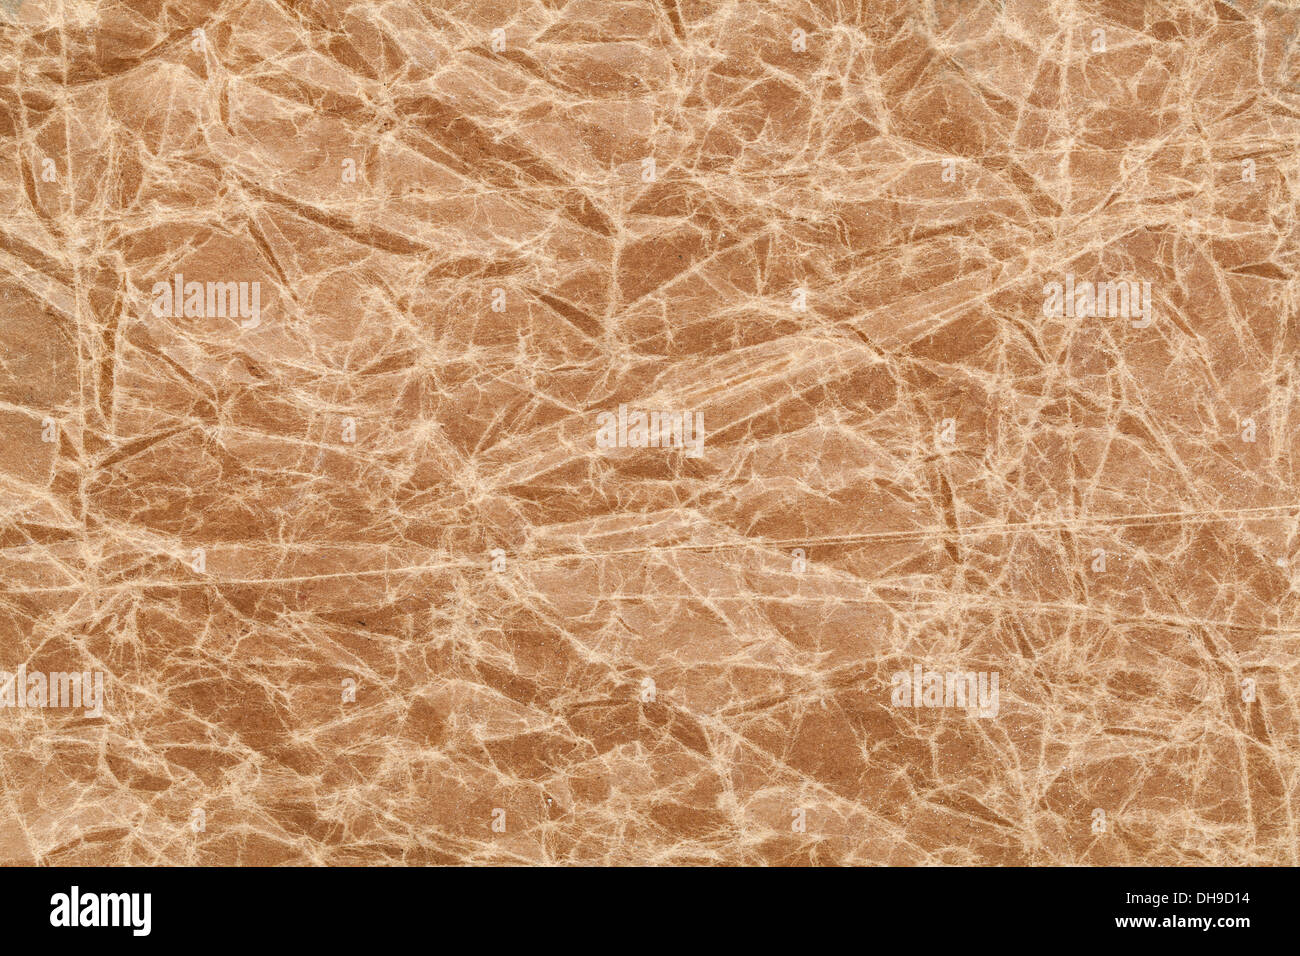 https://c8.alamy.com/comp/DH9D14/crumpled-wrinkled-and-creased-brown-wax-paper-background-DH9D14.jpg